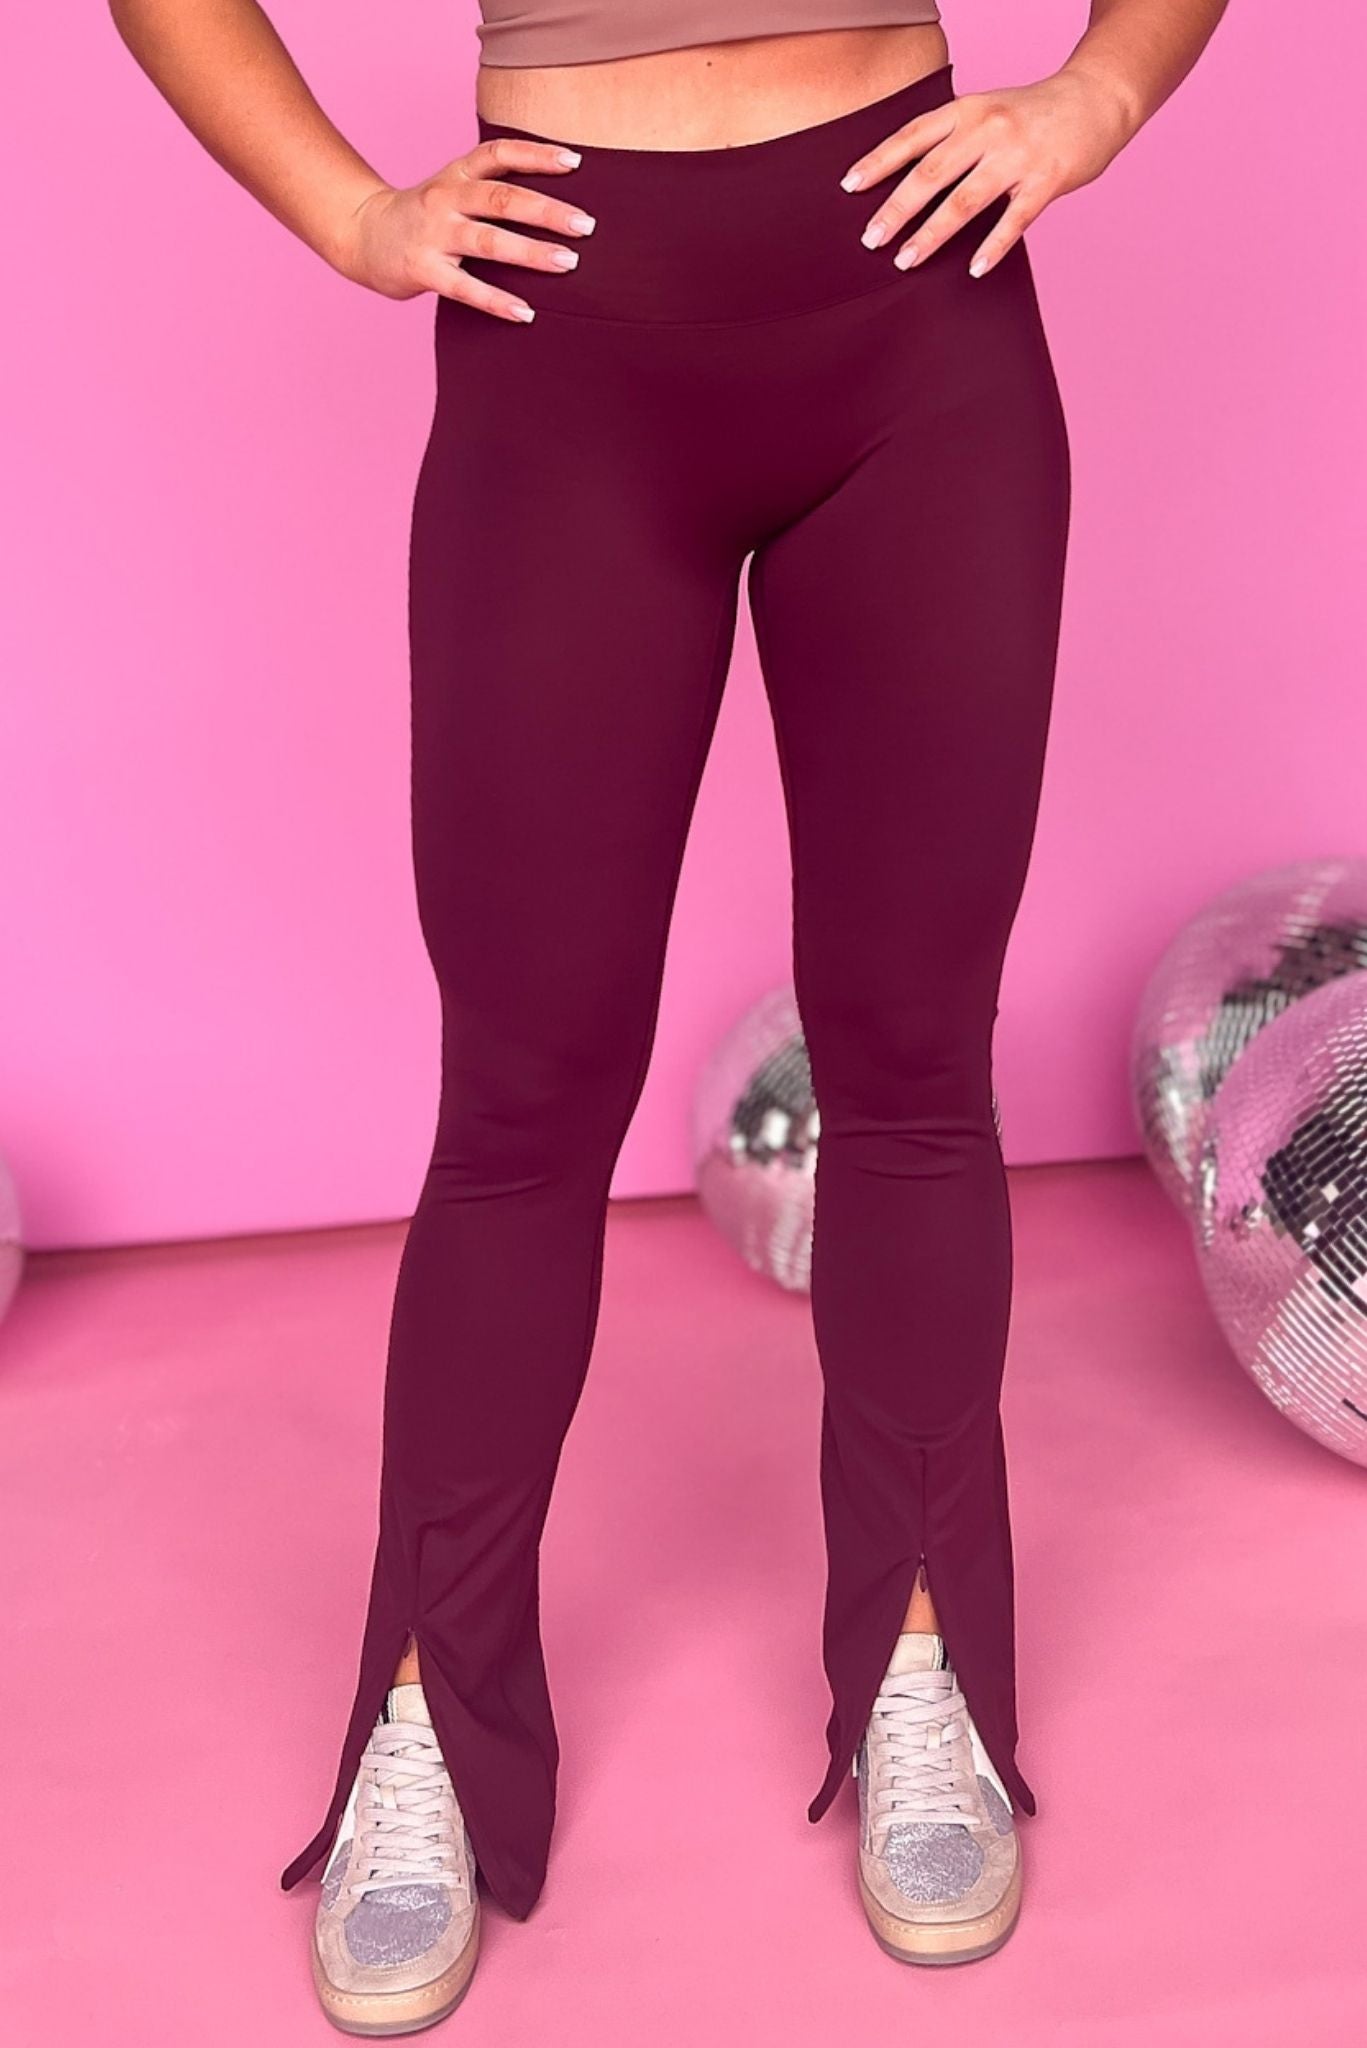 Load image into Gallery viewer, SSYS Burgundy Flare High Waist Leggings With Front Zipper, front zipper detail, high waist, seamless, easy fit, must have, everyday wear, shop style your senses by mallory fitzsimmons
